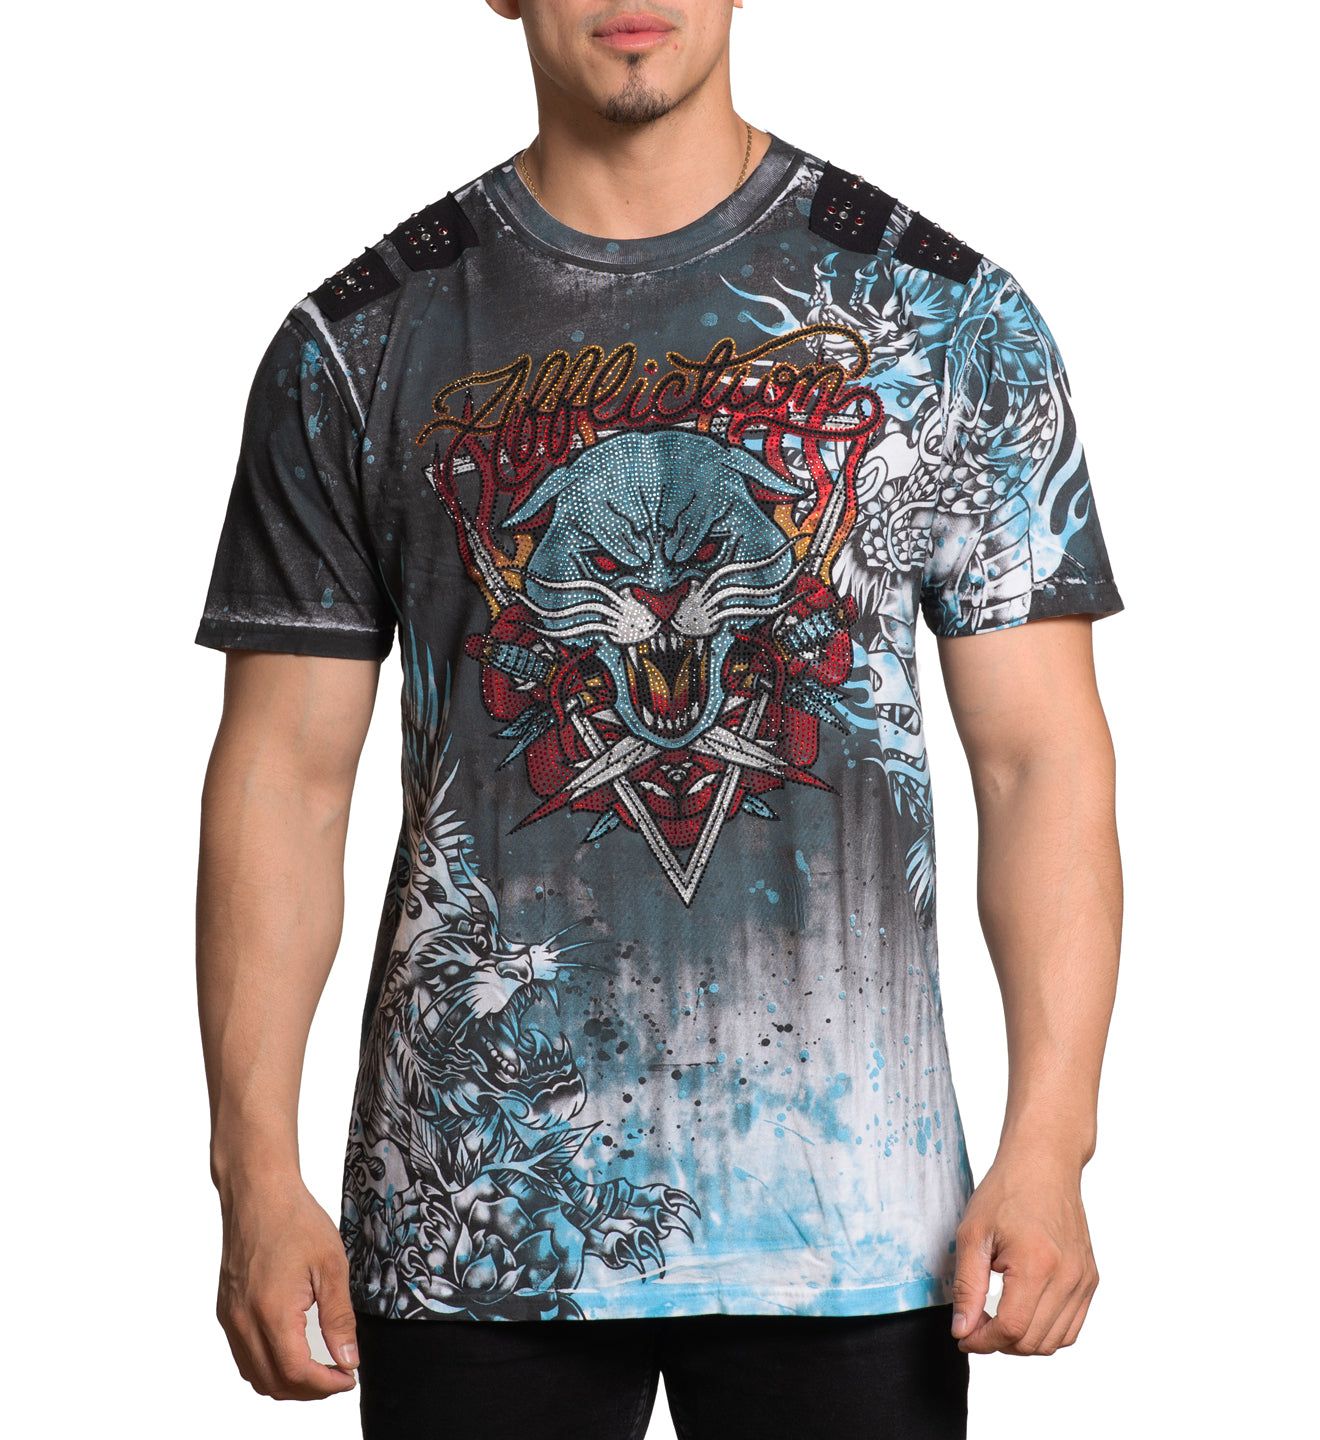 Infernal Prowl - Affliction Clothing